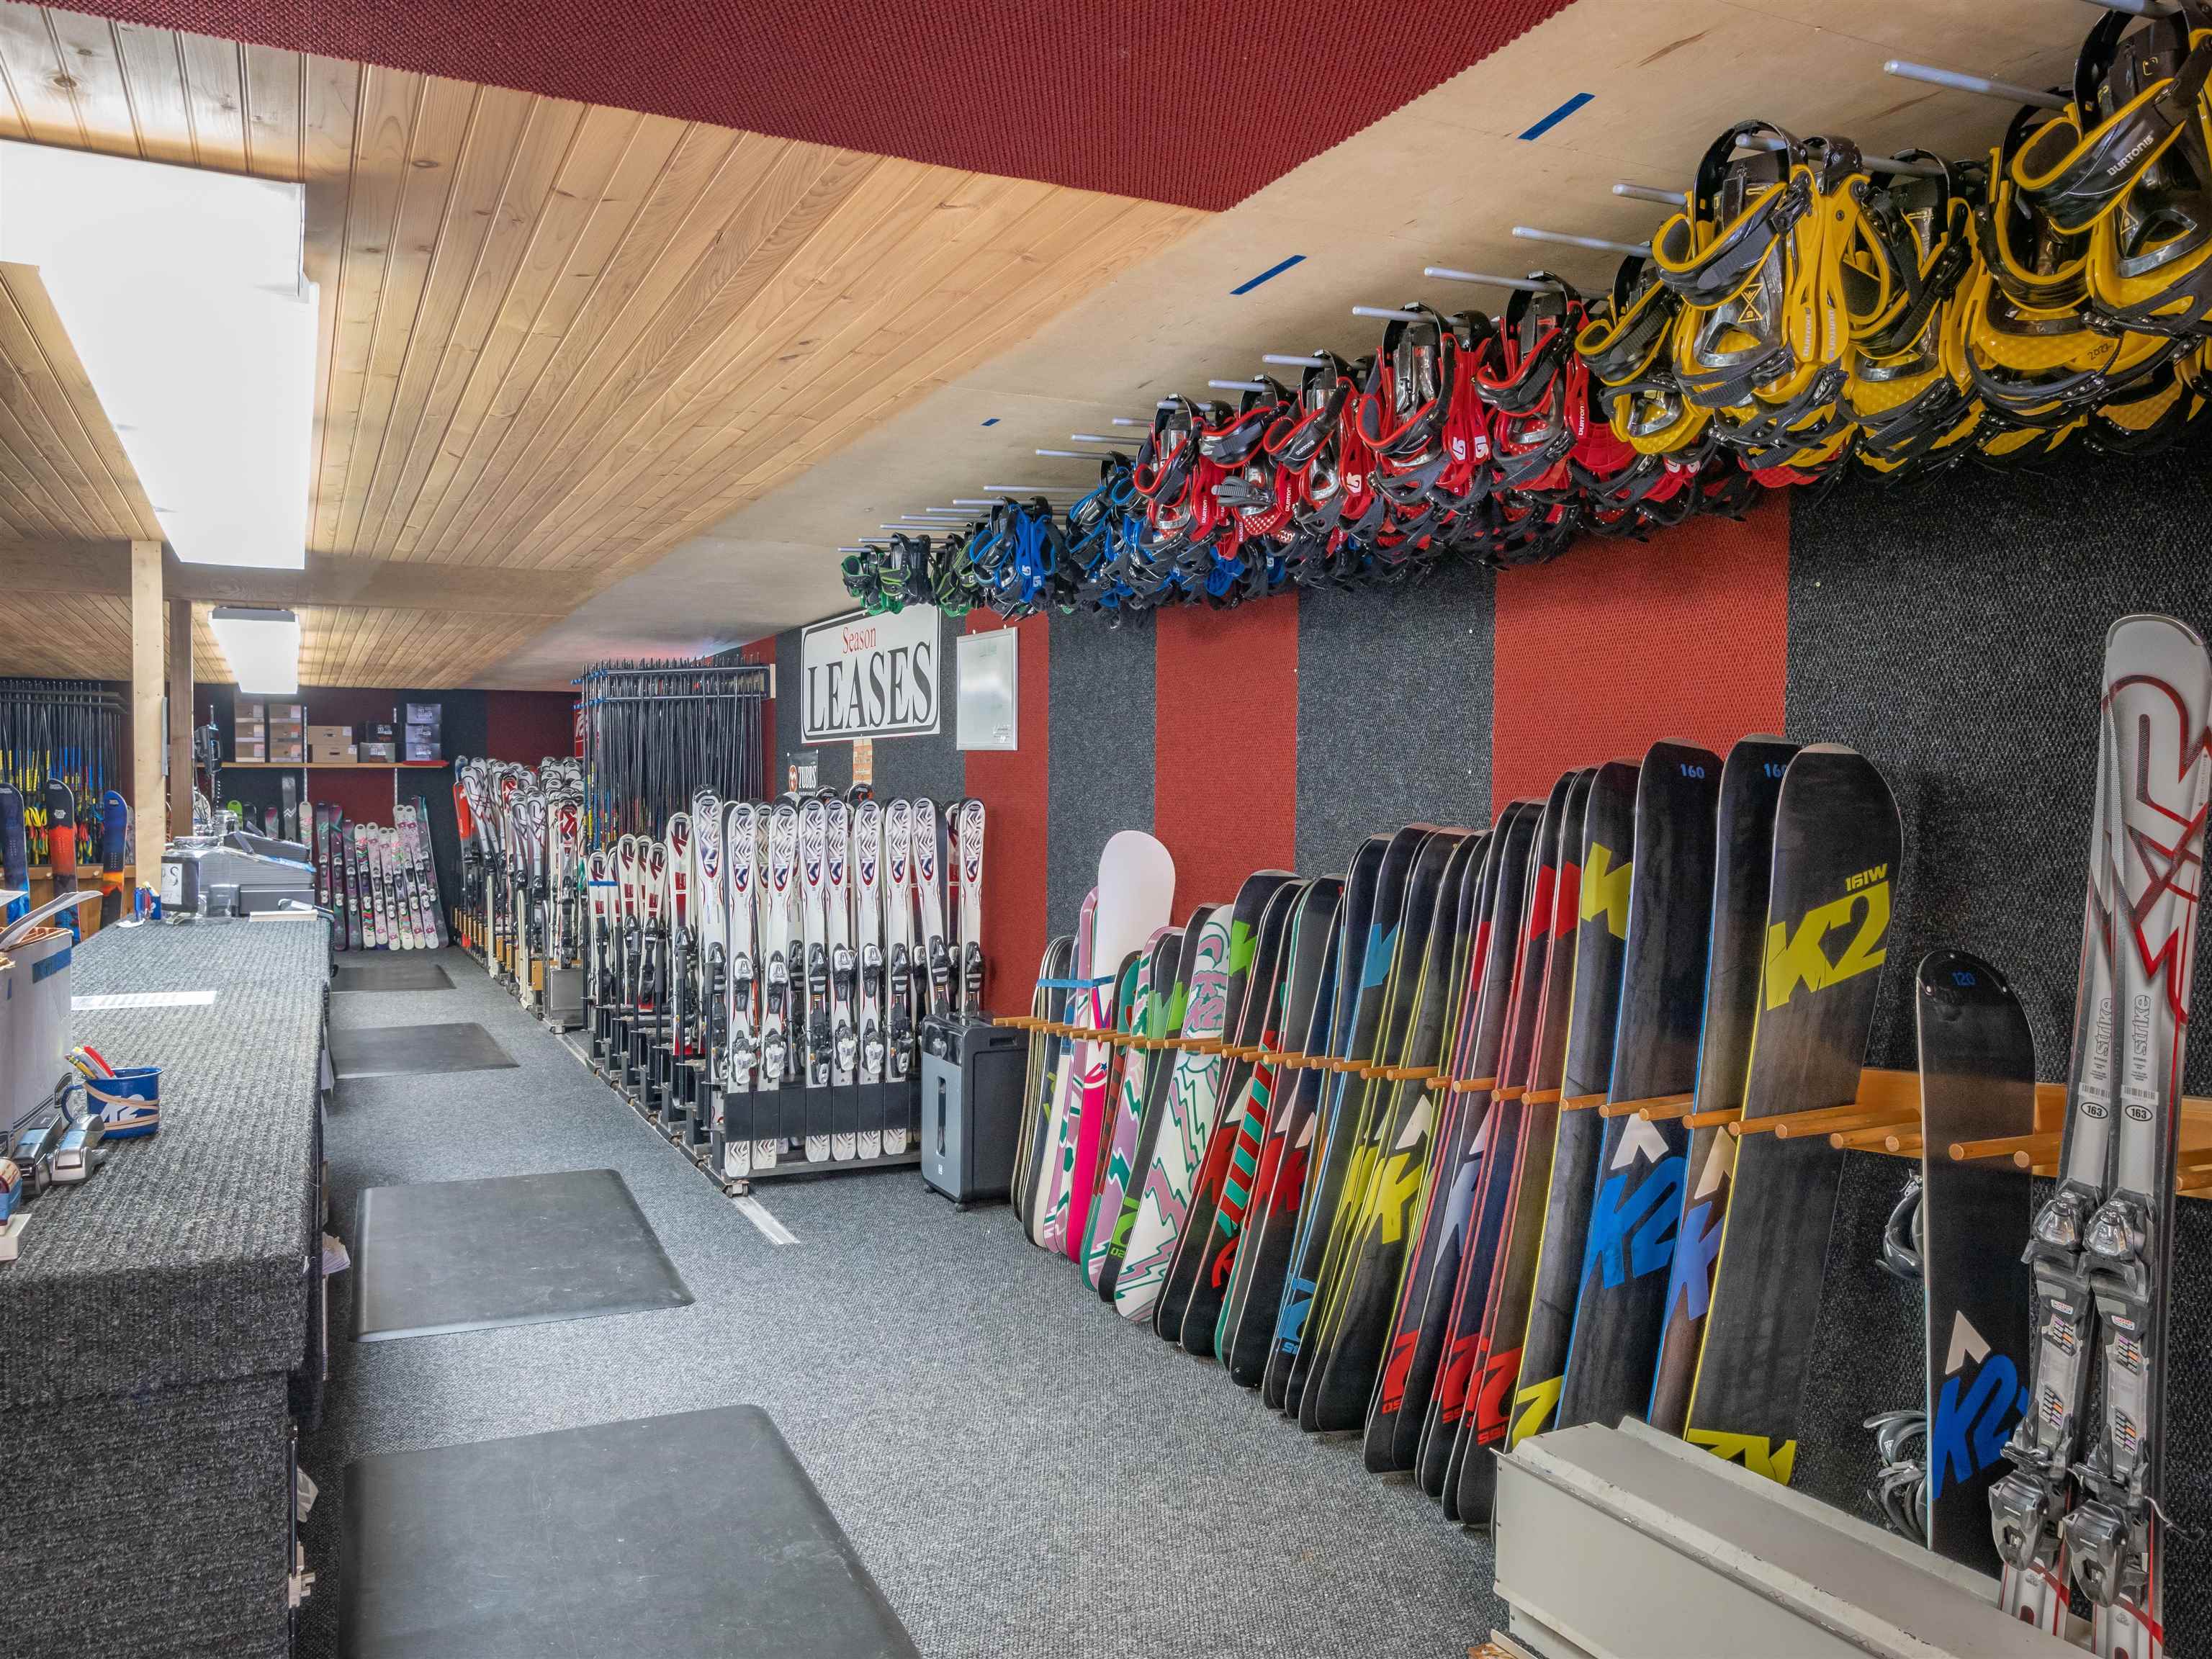 BEAUTIFULLY AND EFFICIENTLY DISPLAYED SKIS AND BOOTS